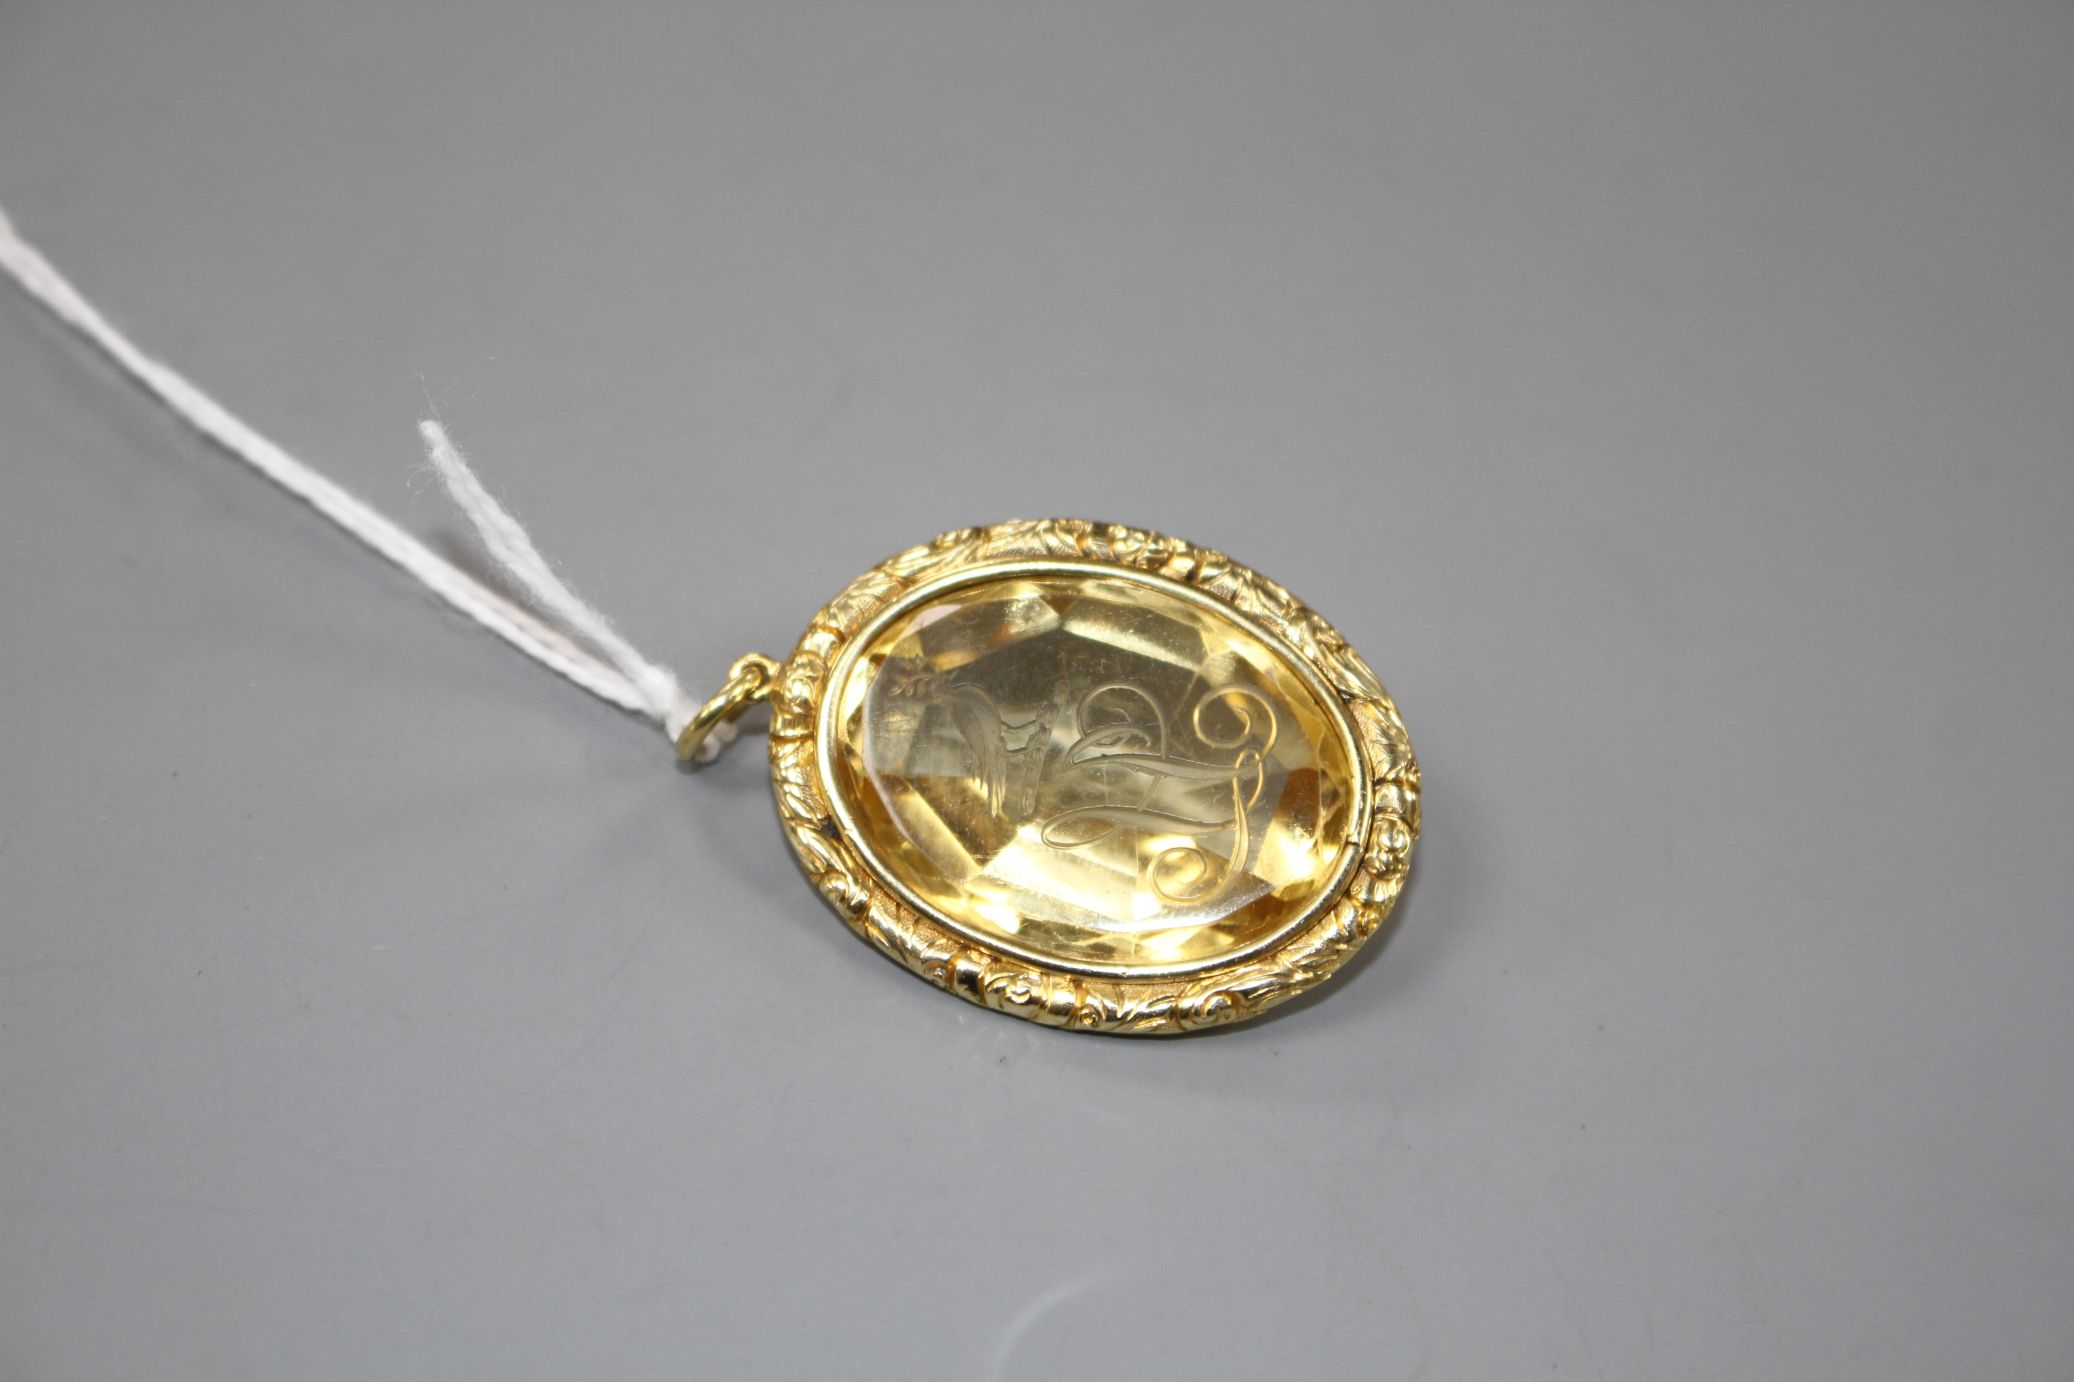 A late Victorian gilt metal mounted oval citrine pendant, engraved with a crested initial, 33mm - Image 2 of 3